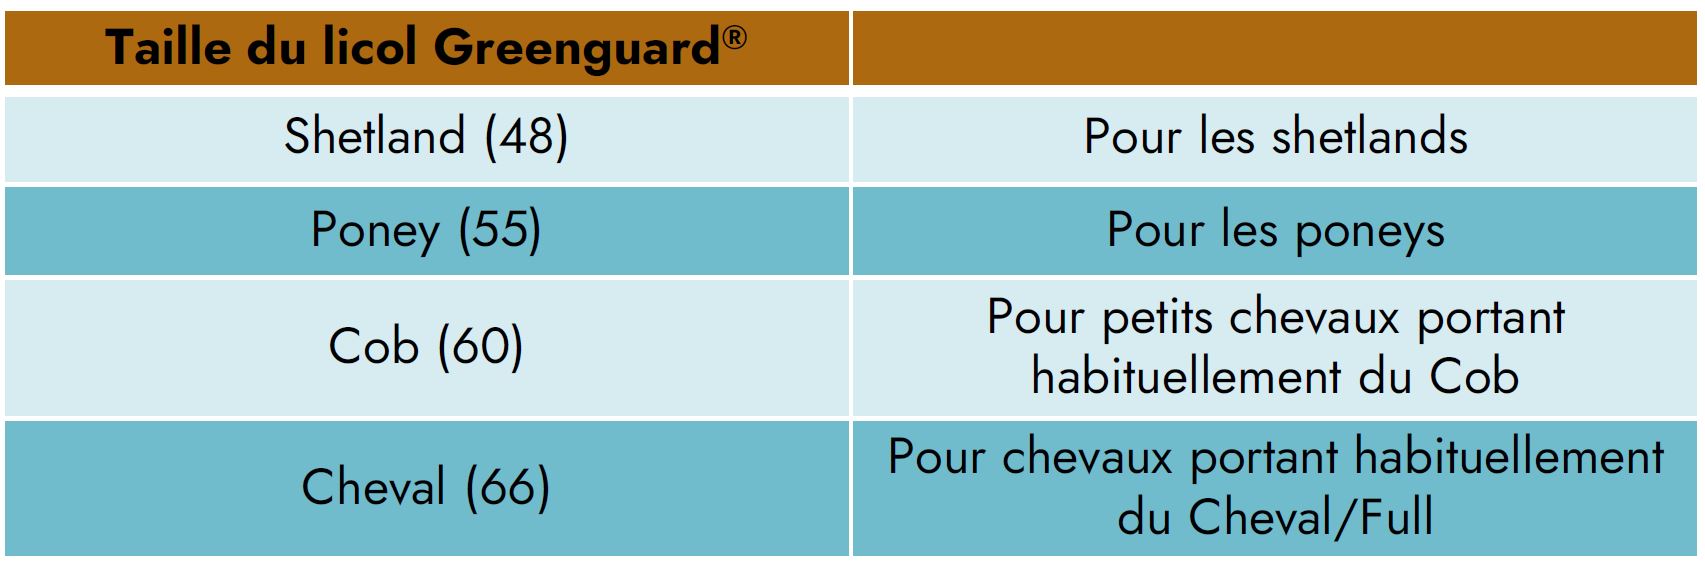 Guide des tailles Greenguard©